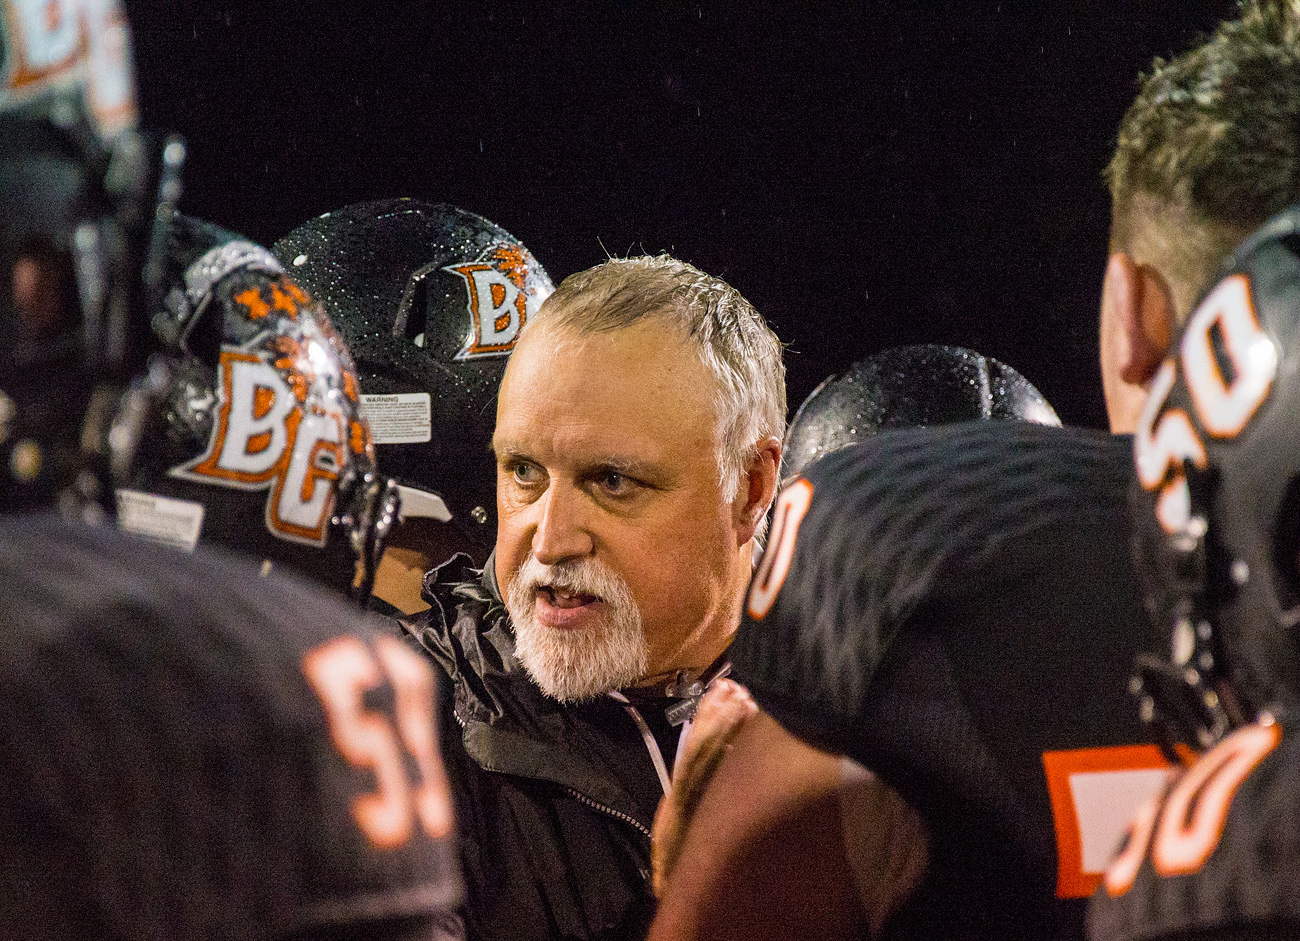 Battle Ground football coach Larry Peck announced his resignation from the Tigers program.